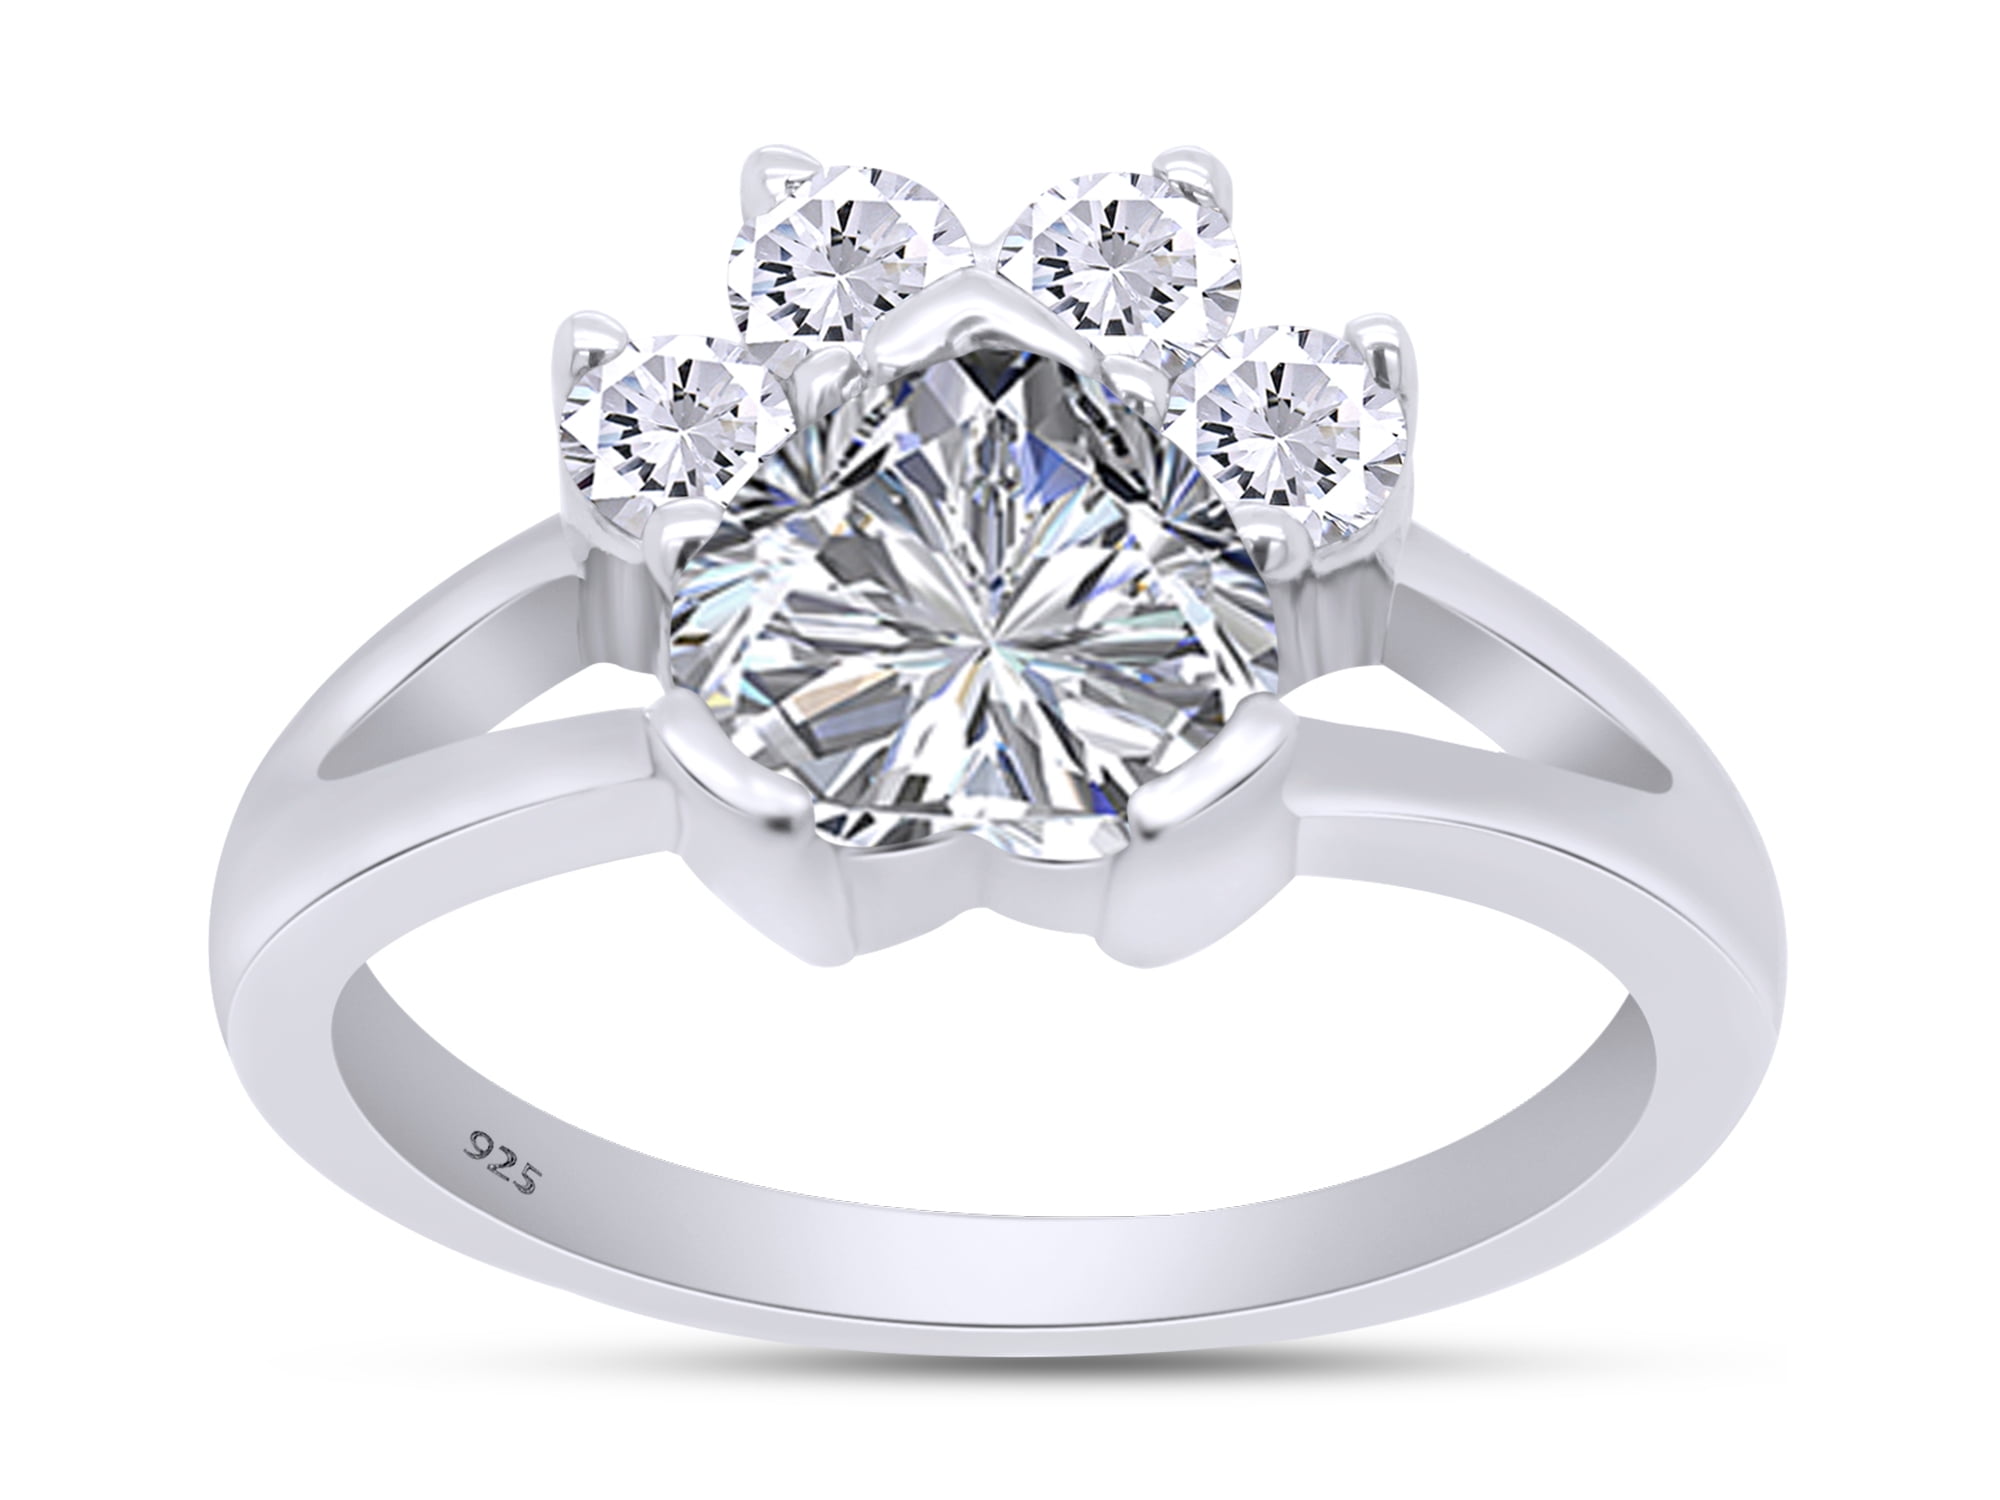 Wishrocks Round Cut White Cubic Zirconia Heart Engagement Ring in 14K White Gold Over Stering Silver 